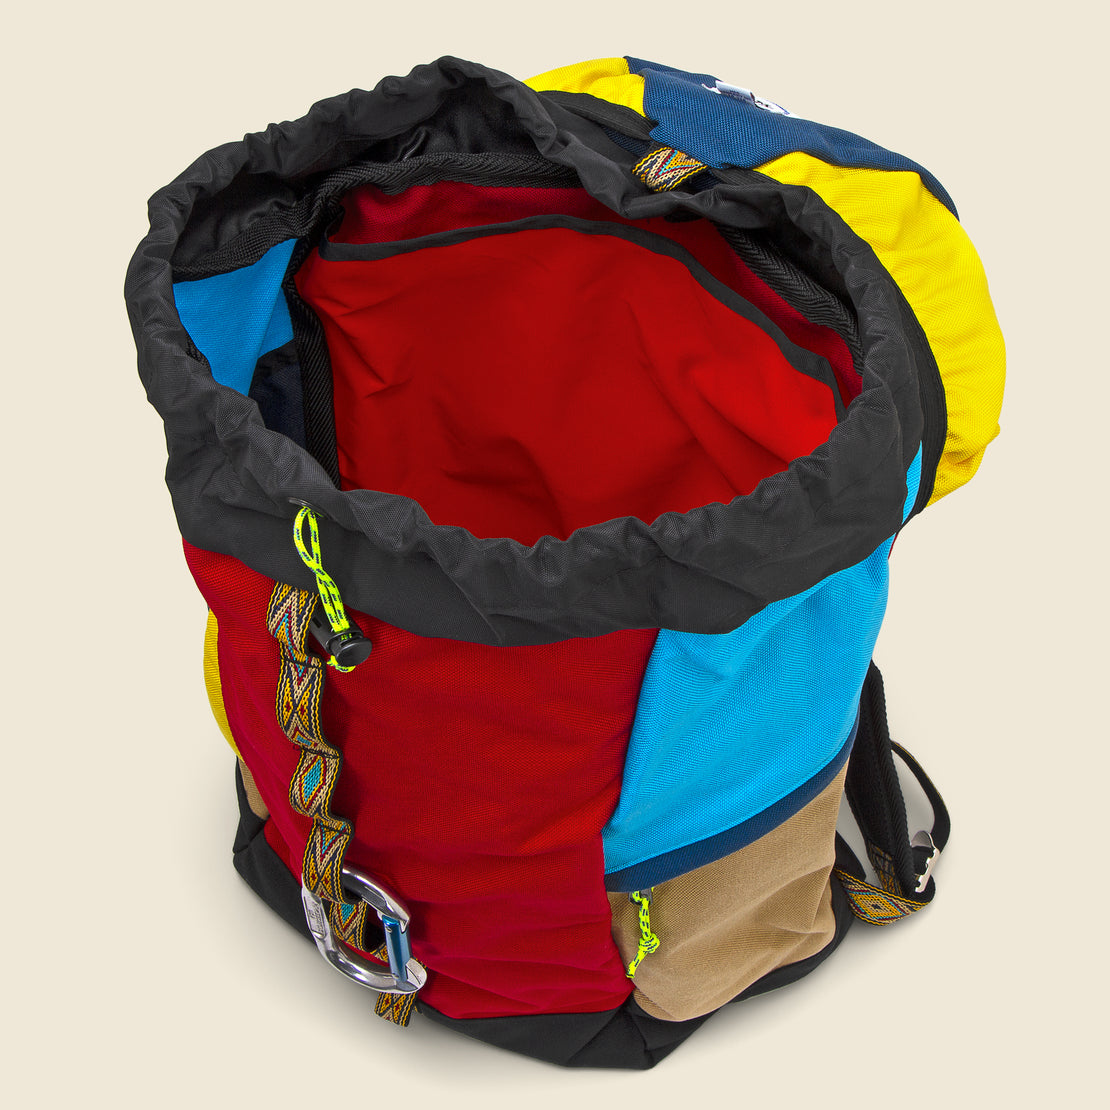 Large Climb Pack - Old Navy/Barn Red - Epperson Mountaineering - STAG Provisions - Accessories - Bags / Luggage